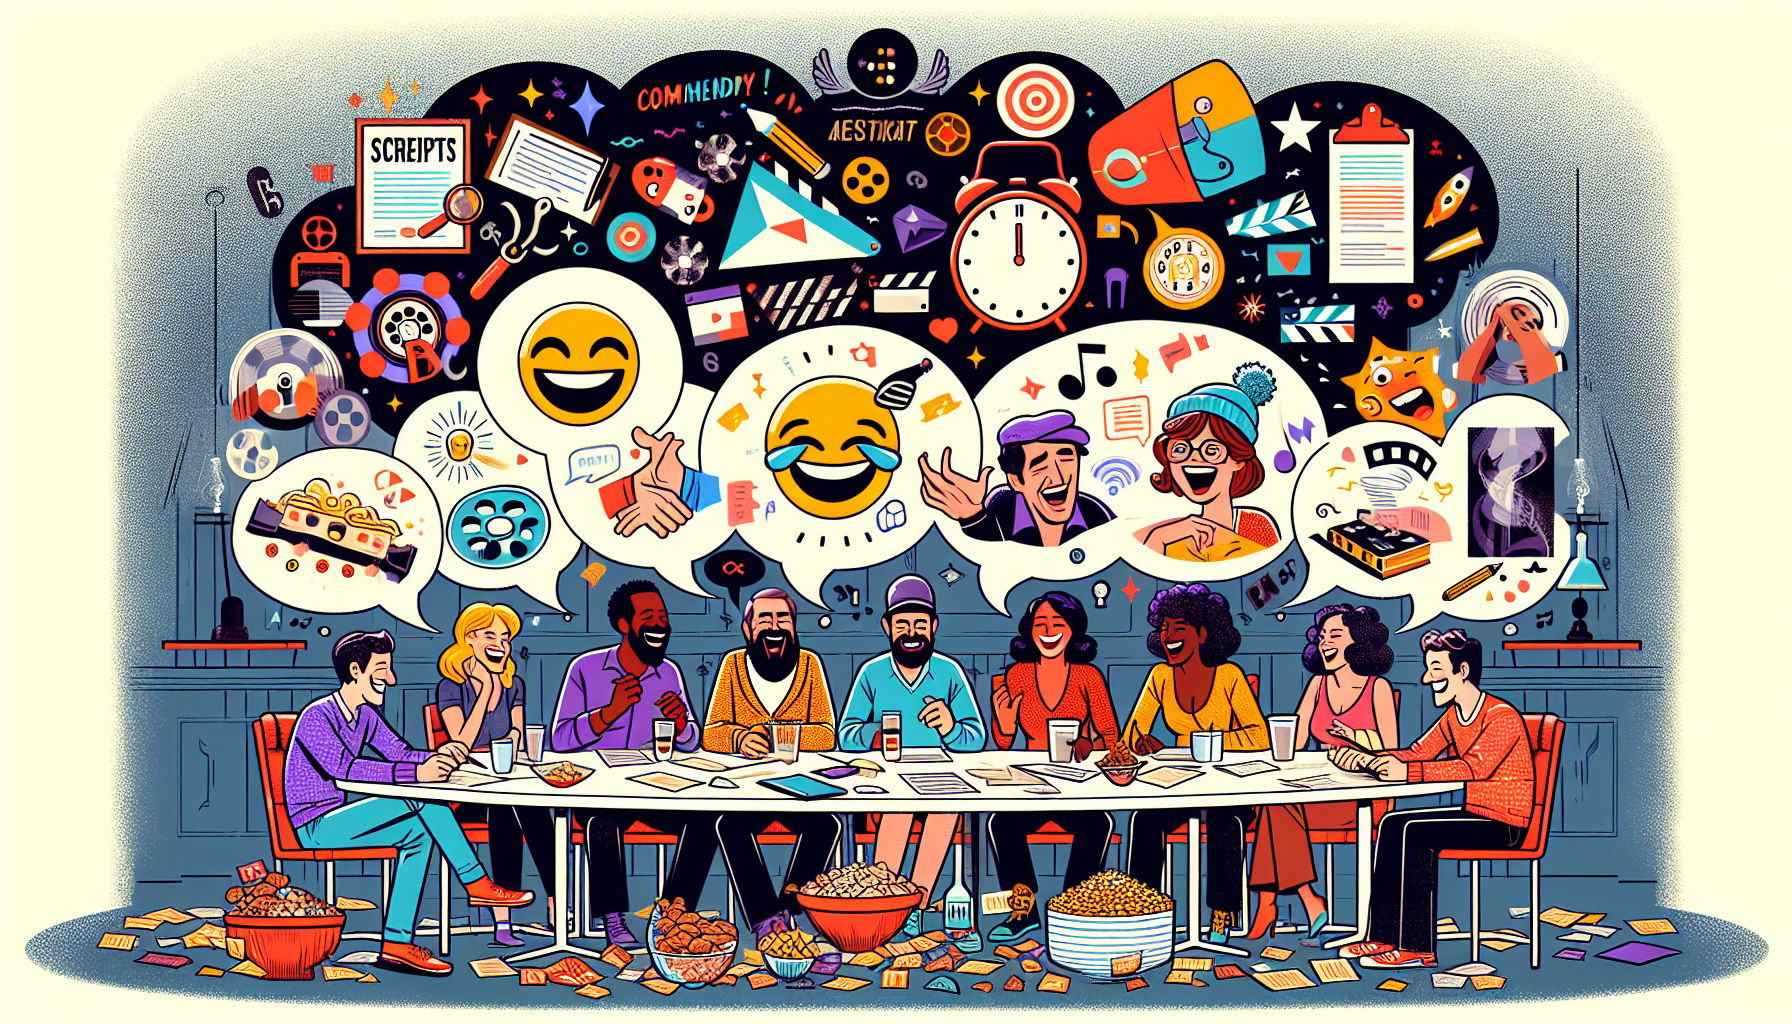 An animated image of a diverse group of screenwriters sitting at a round table, laughing and discussing scripts with colorful thought bubbles showing classic comedy timing symbols like ticking clocks,